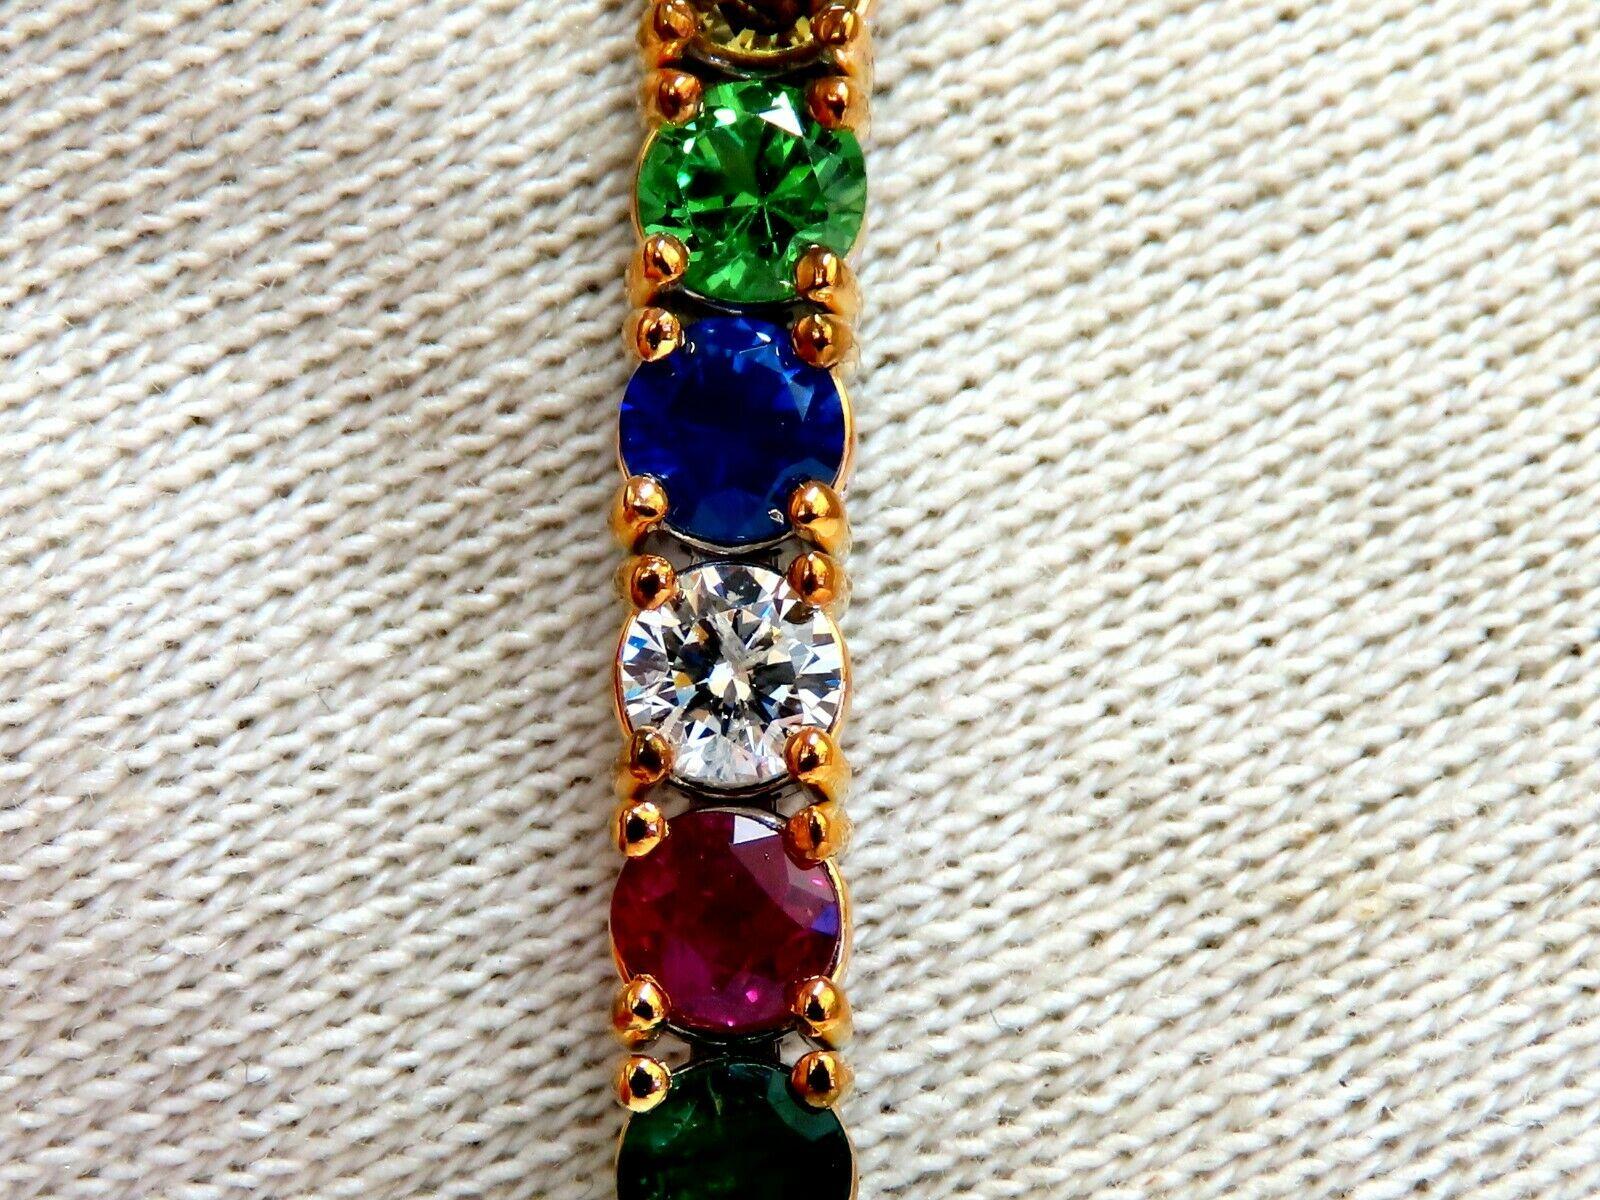 Gem Line.

13.30ct. Natural Blue/Yellow / Green Sapphires, 

Green Garnet, Emerald, Ruby & Diamonds bracelet.

Full round cuts, great sparkles.

Clean Clarity & Transparent.

1.12ct Natural Round Brilliant Diamonds.

H-color Vs-2 clarity

Secure